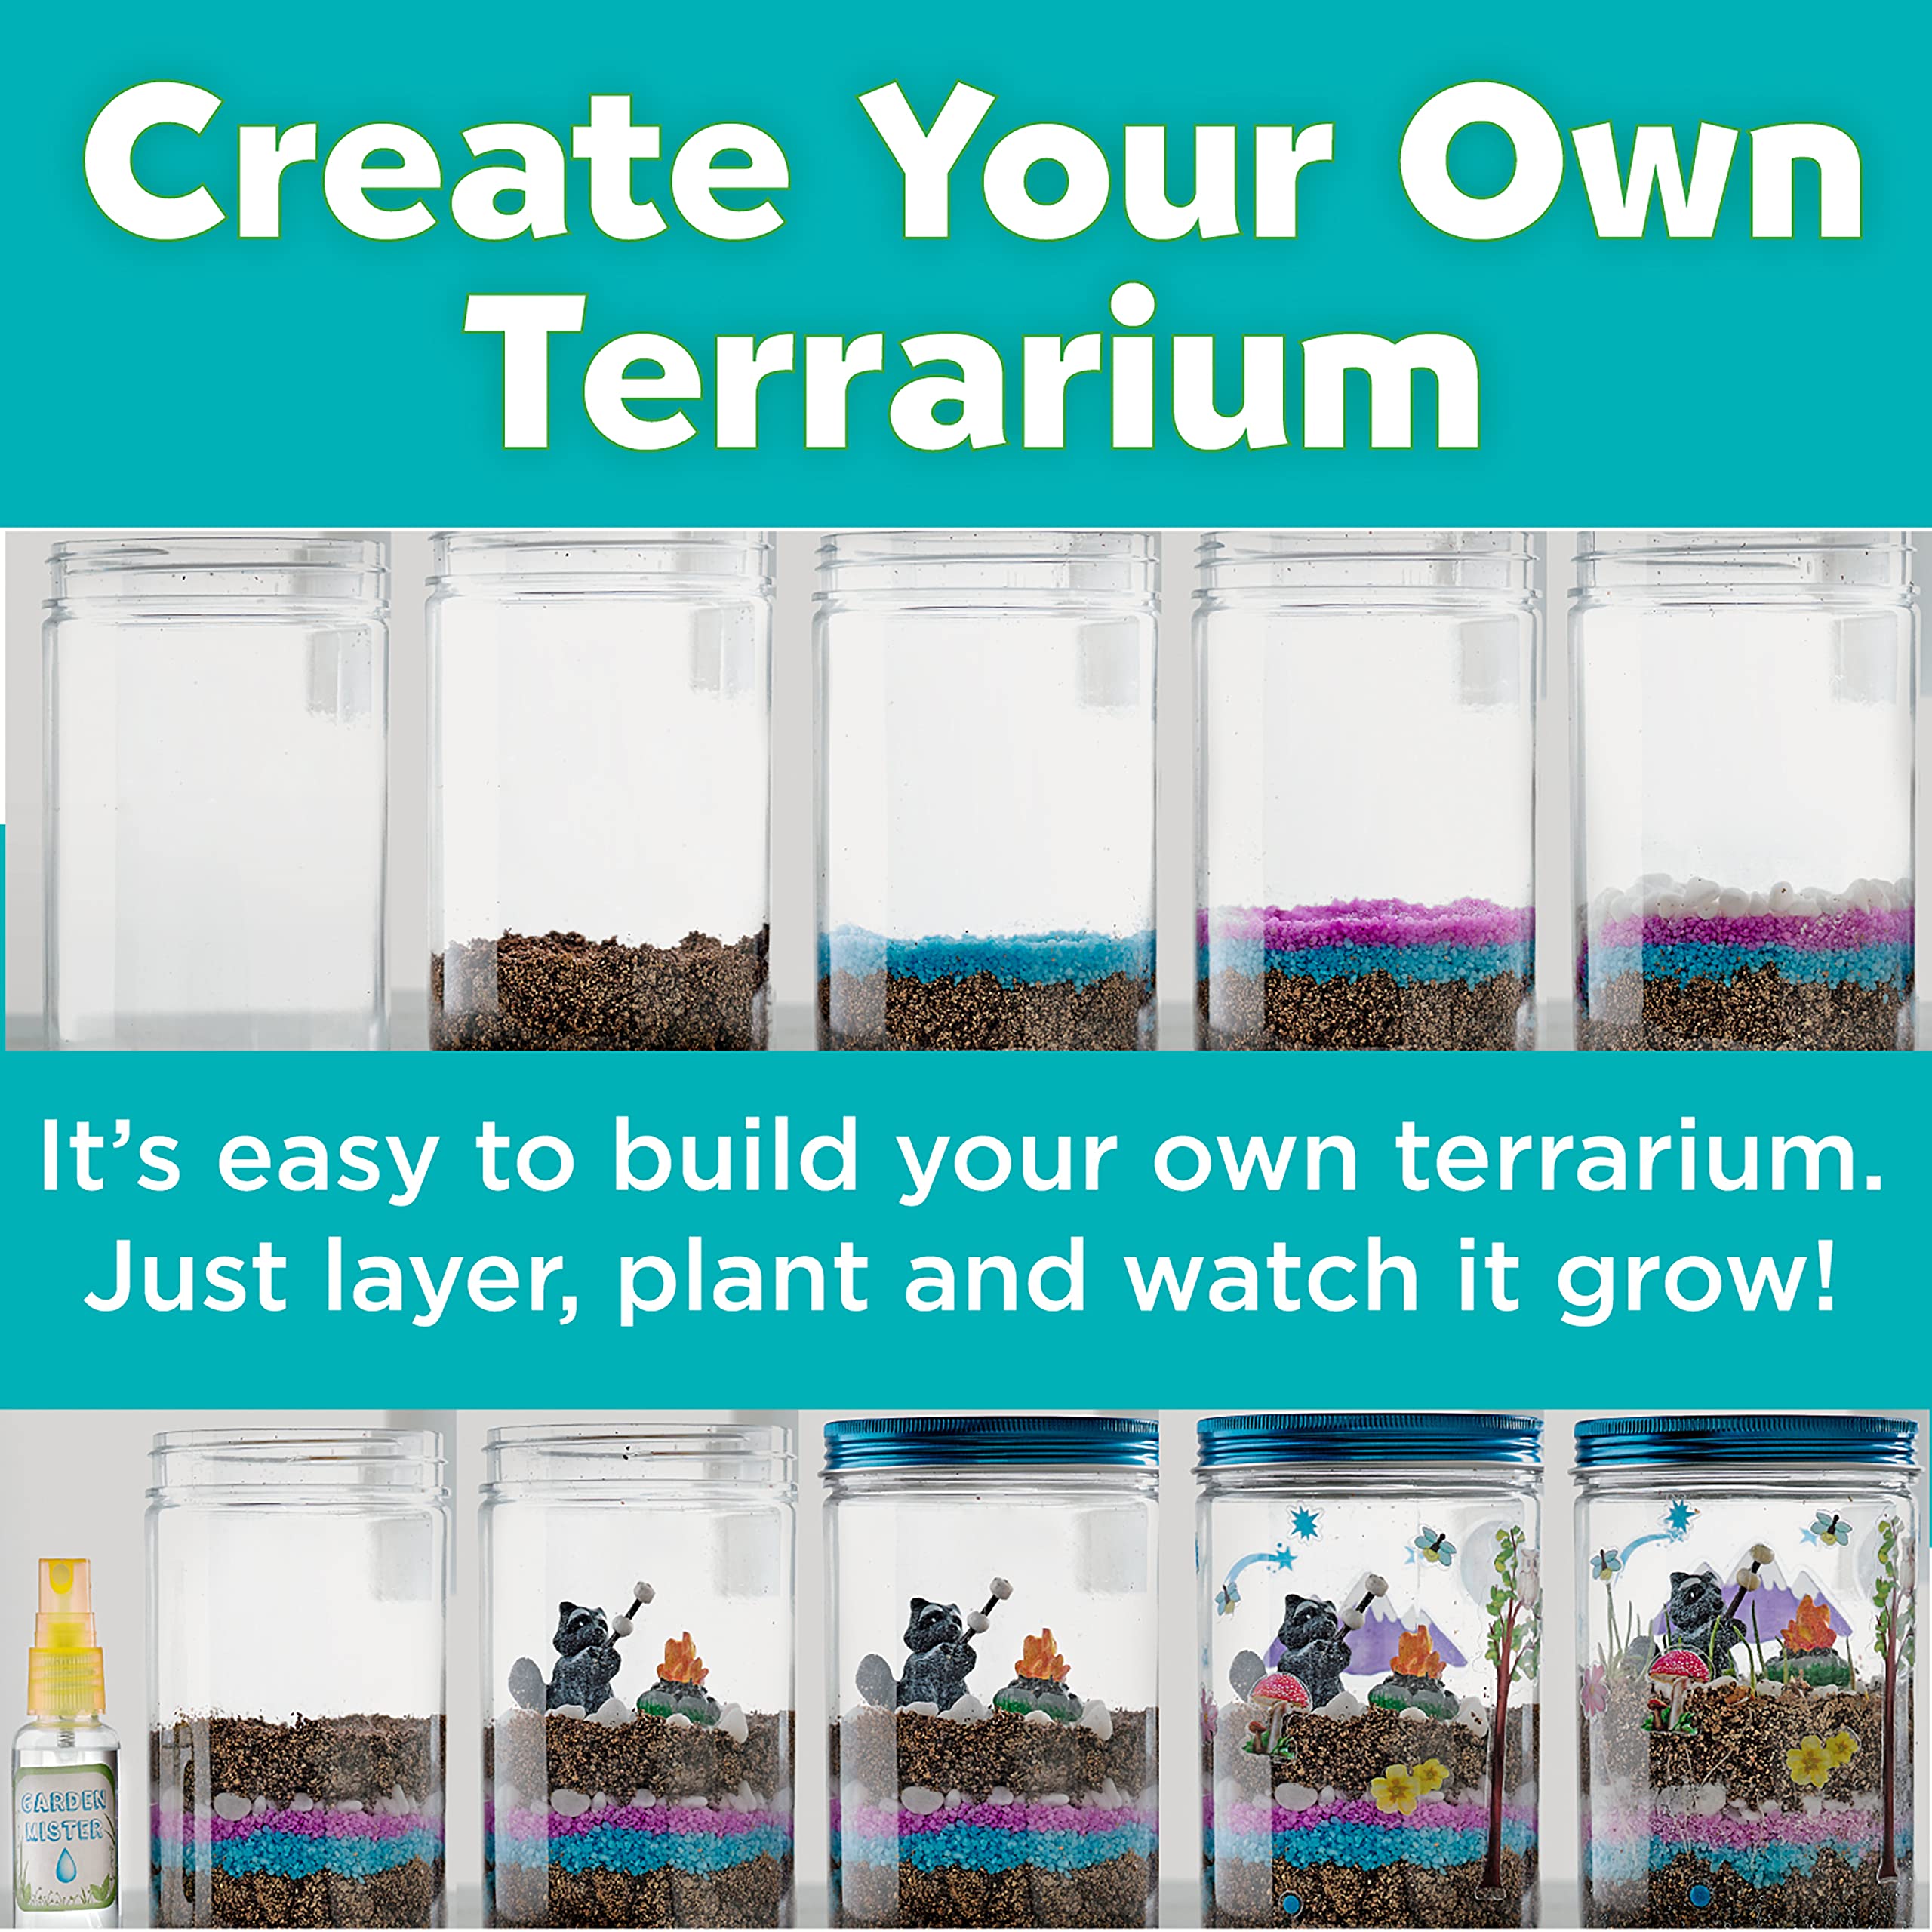 Creativity for Kids Grow 'N Glow Terrarium Kit for Kids - Science Activities for Ages 5-8+, Craft Kits and Creative Gifts for Kids